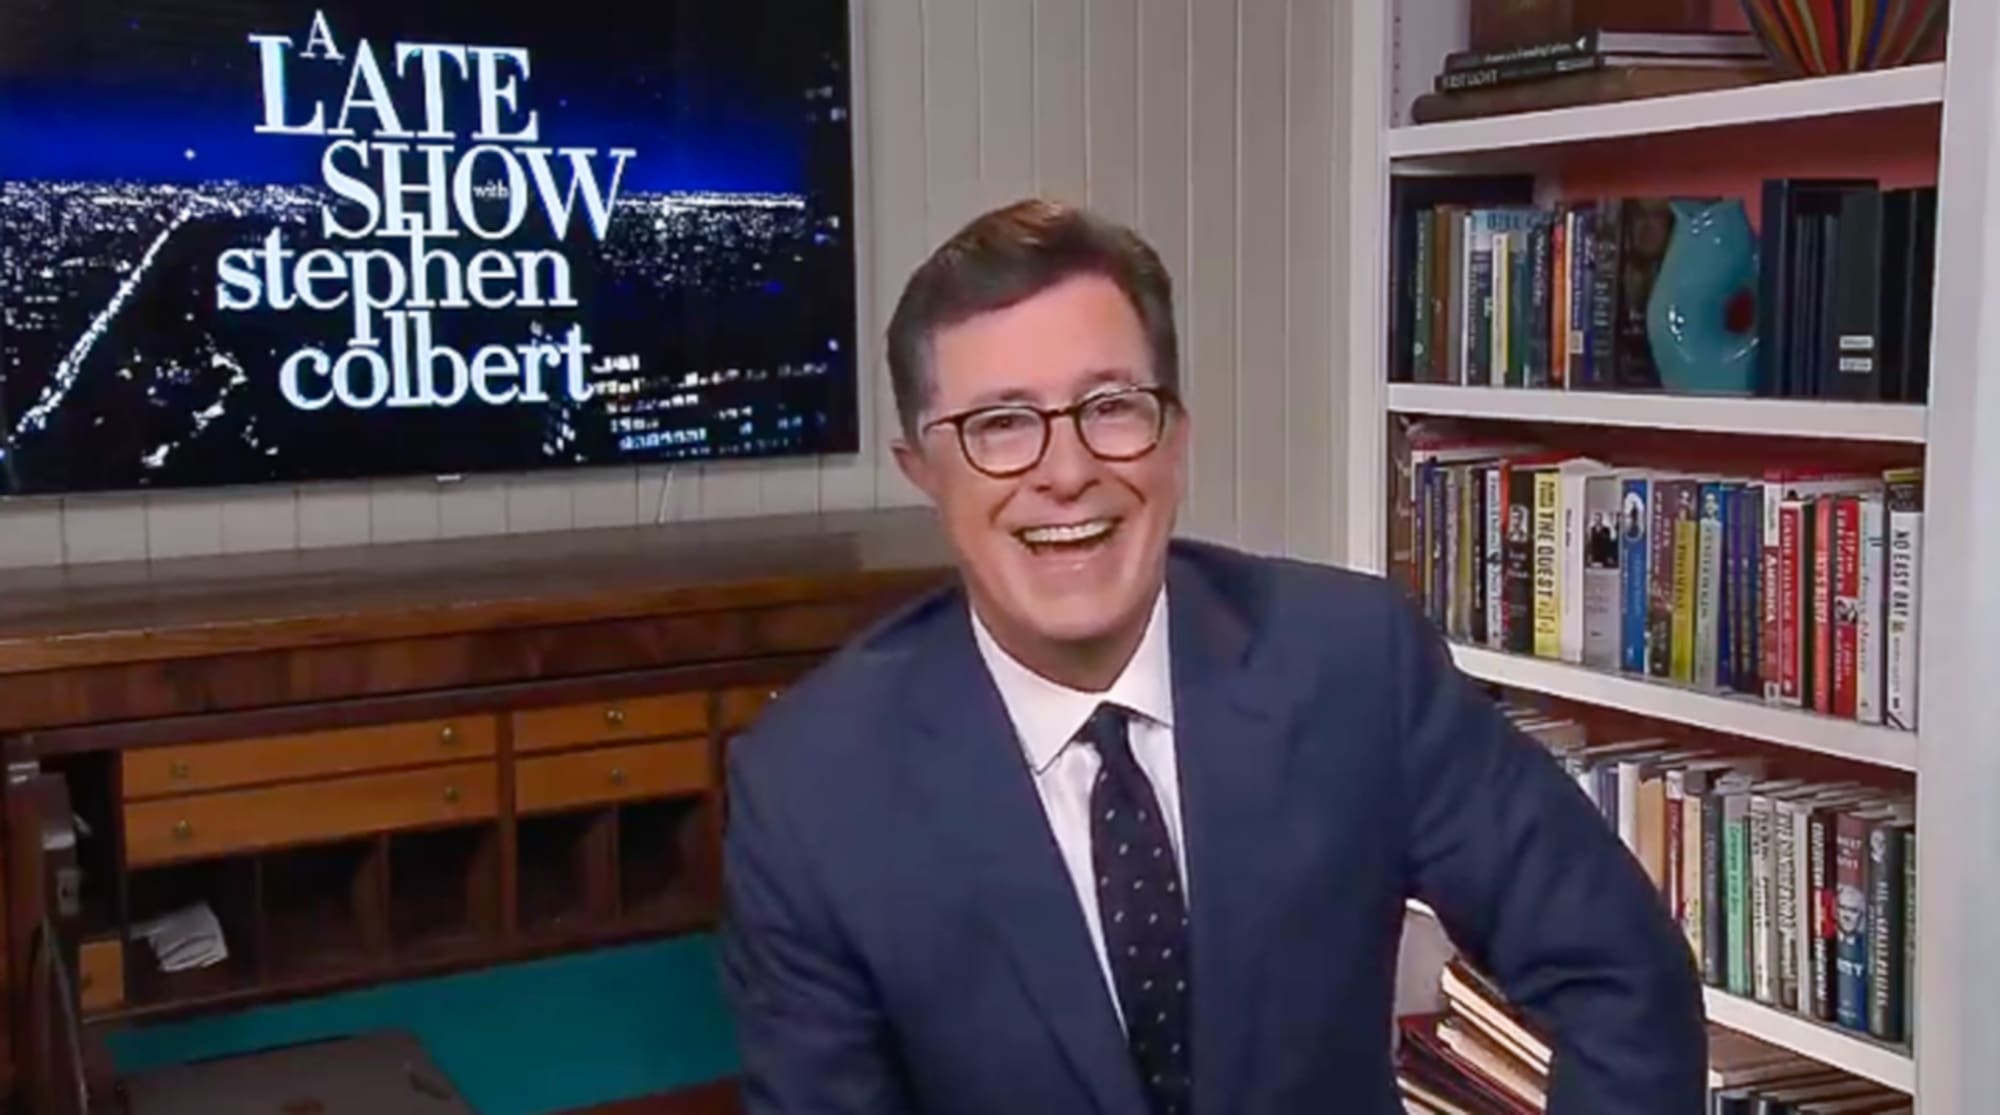 Who's on The Late Show with Stephen Colbert tonight, February 11?